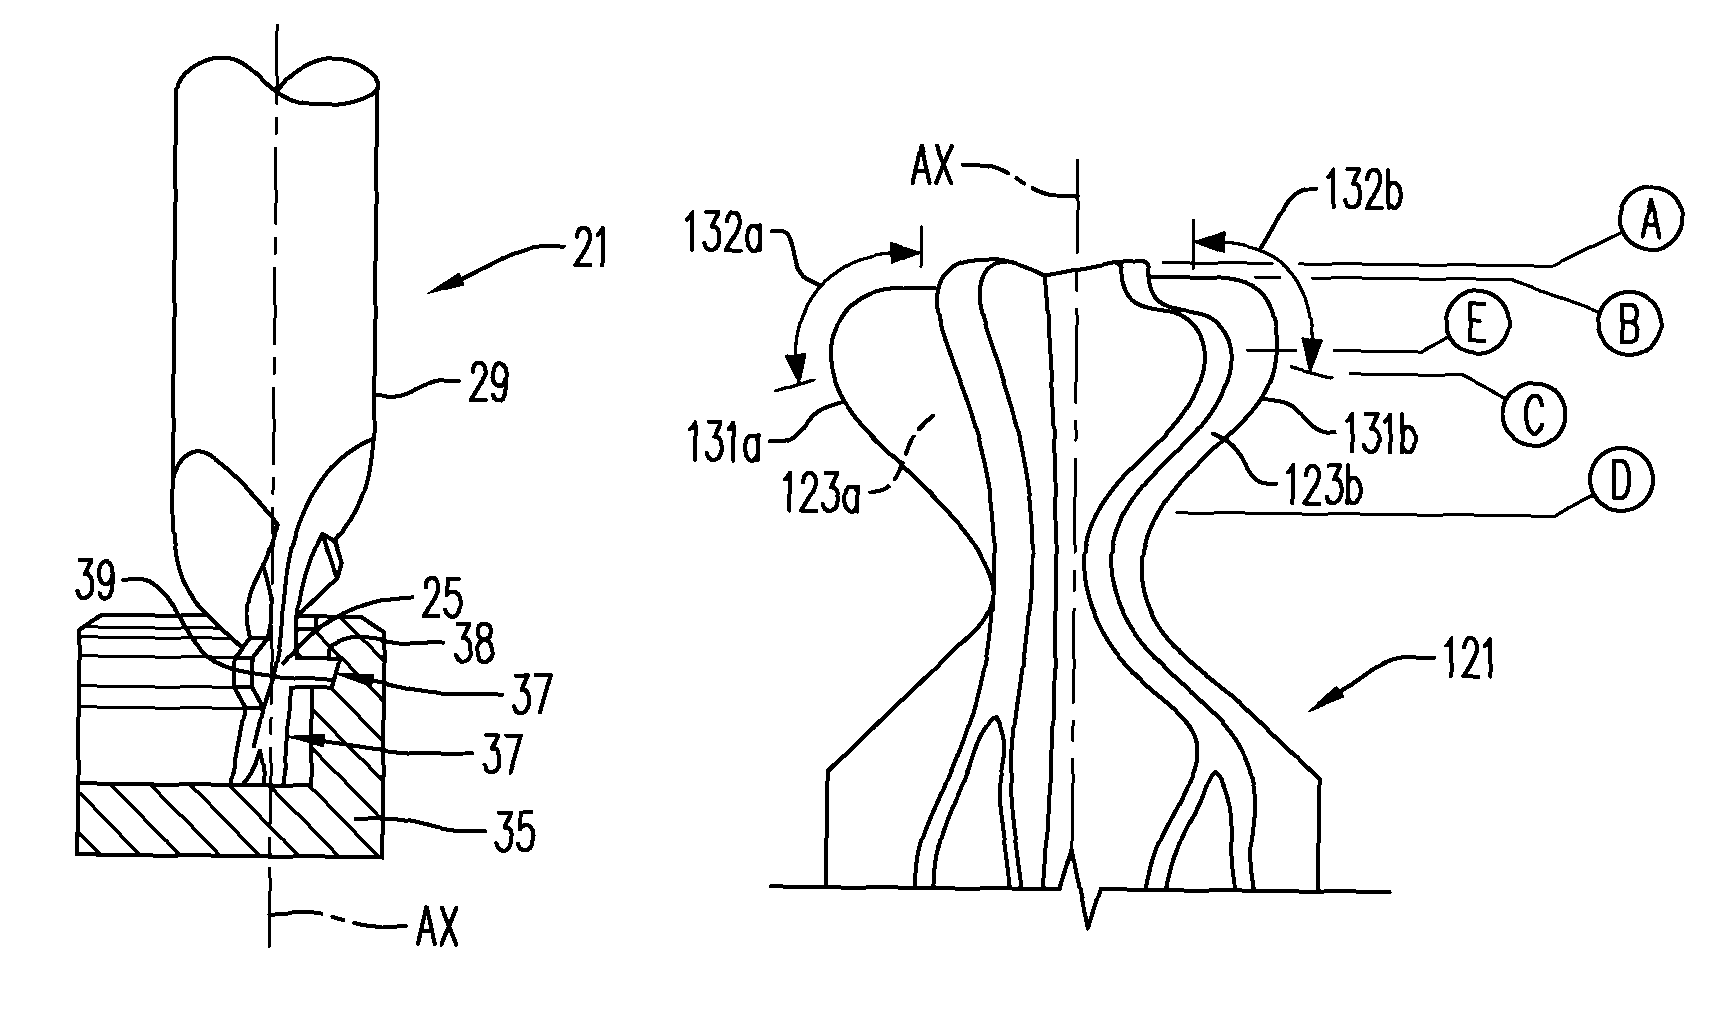 Cutting tool with multiple flutes defining different profiles, and method